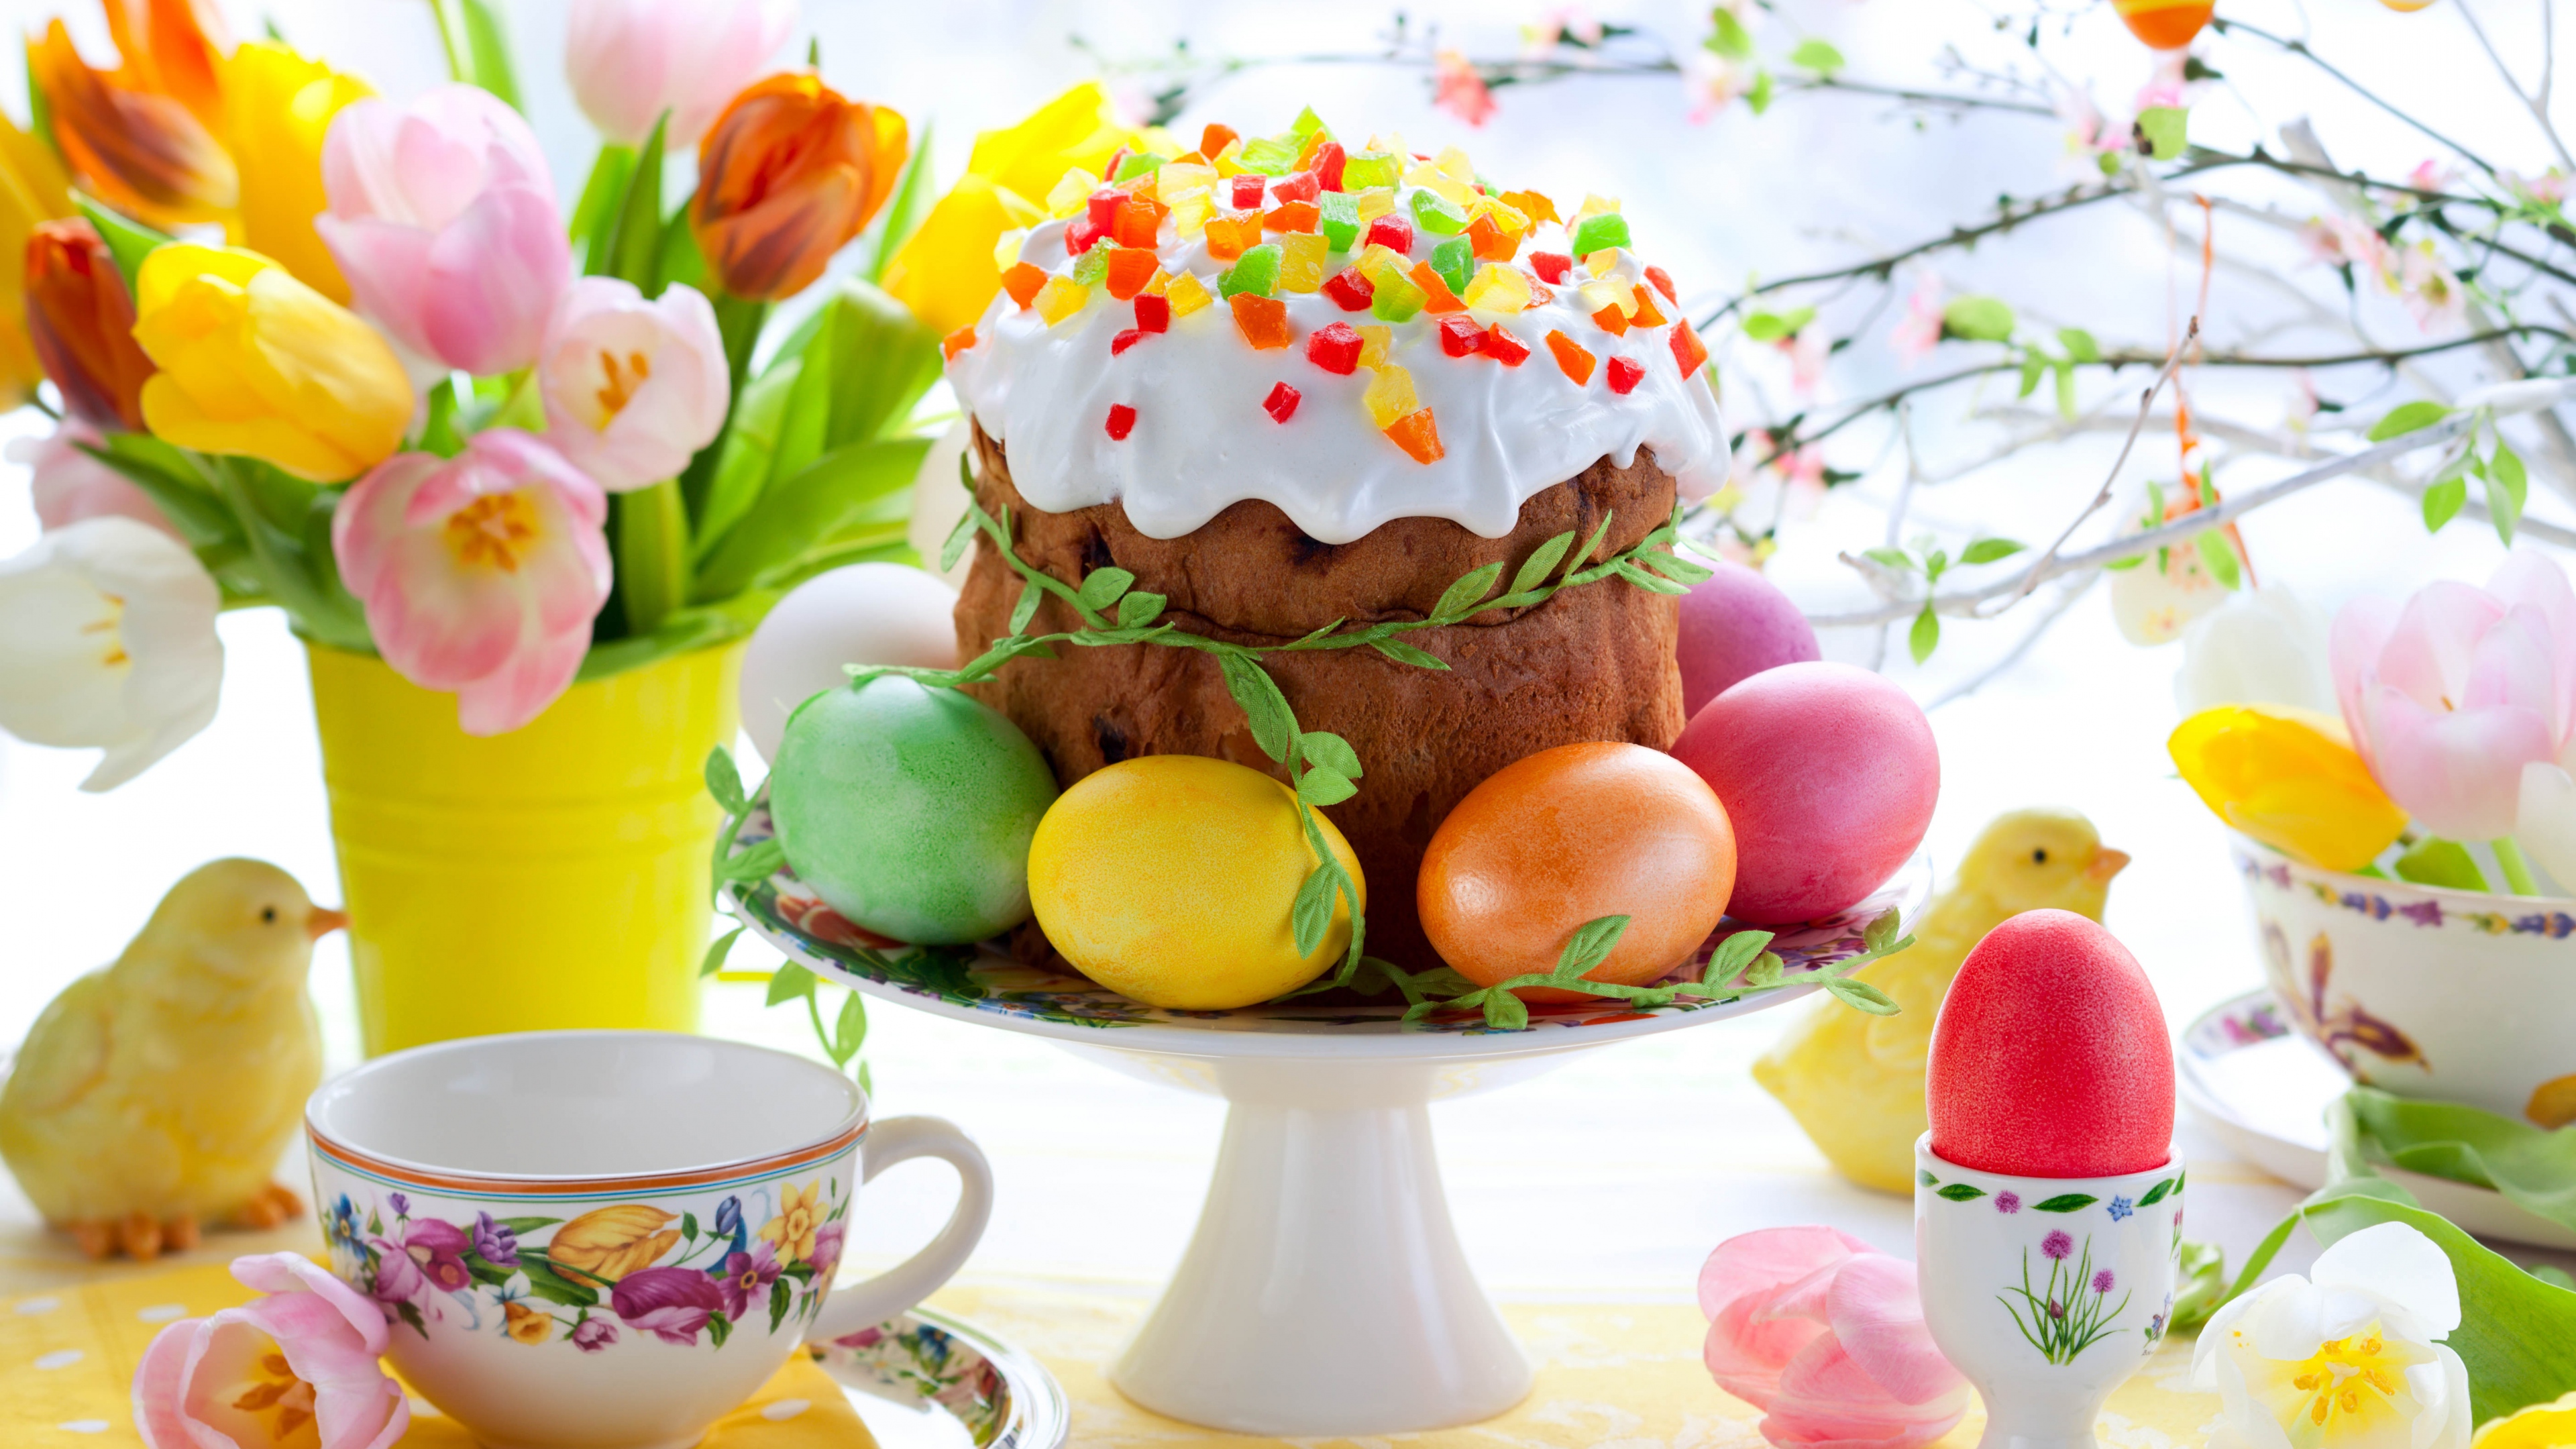 easter_egg_table_layout_holiday_78240_3840x2160